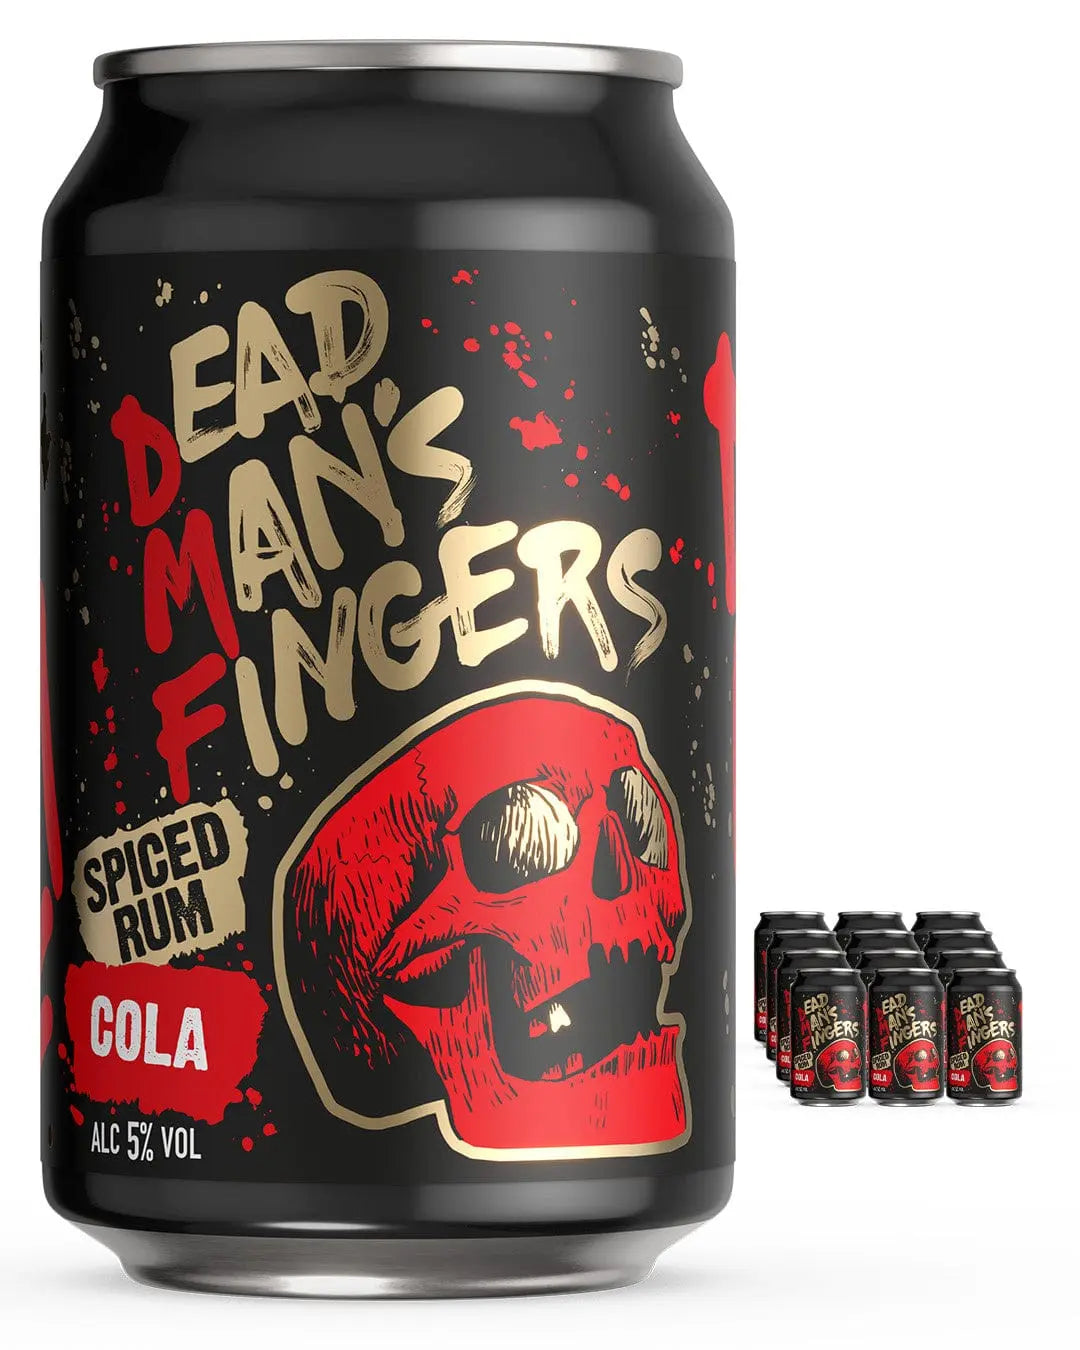 Dead Man’s Fingers Spiced Rum with Cola Multipack, 12 x 330 ml Ready Made Cocktails